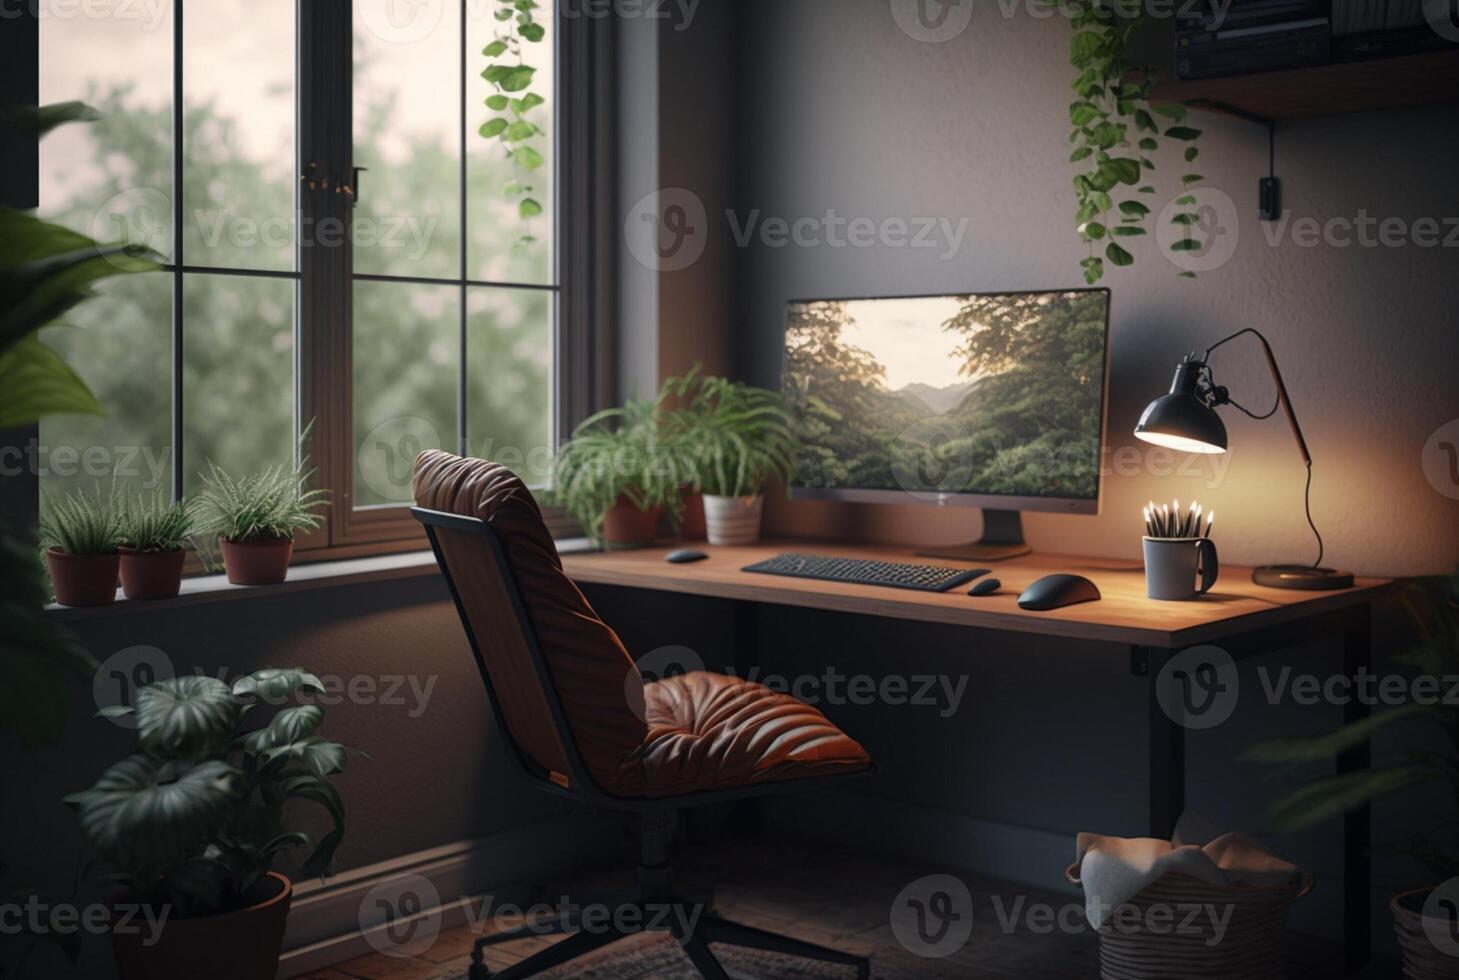 Cozy home office interior featuring furniture, houseplants and large windows to let in natural light. photo